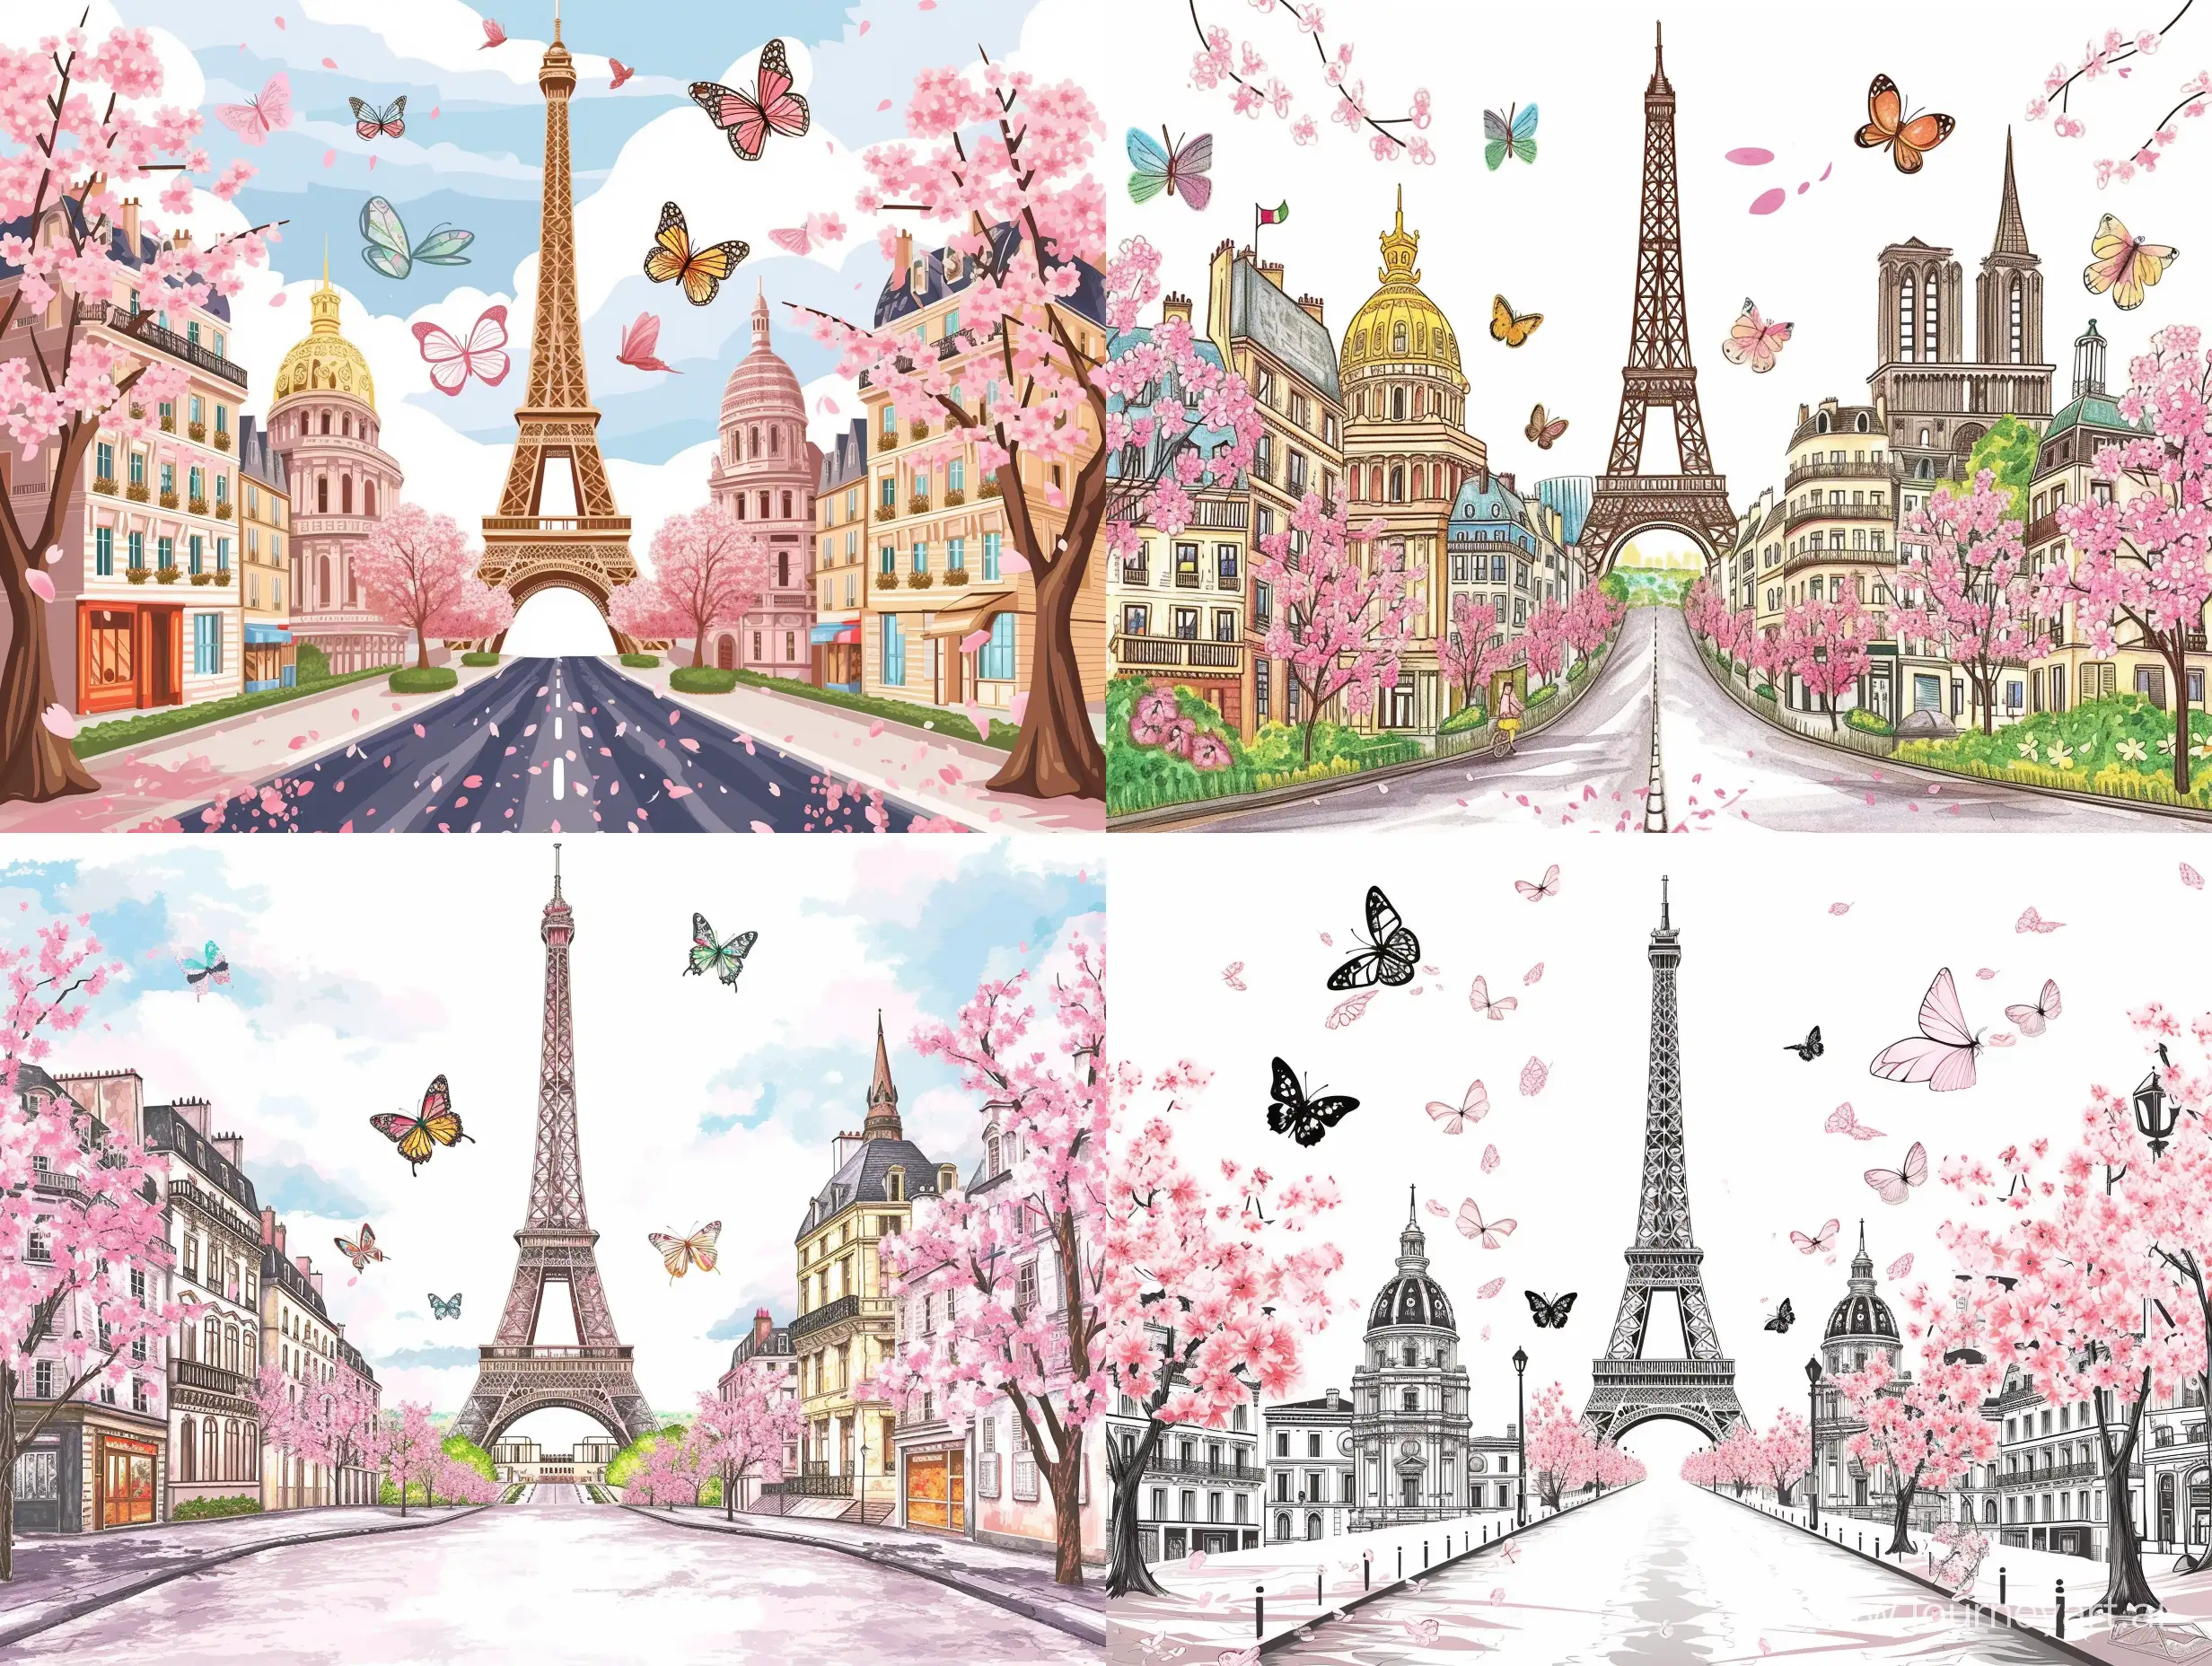 Eiffel-Tower-surrounded-by-Famous-French-Landmarks-and-Cherry-Blossoms